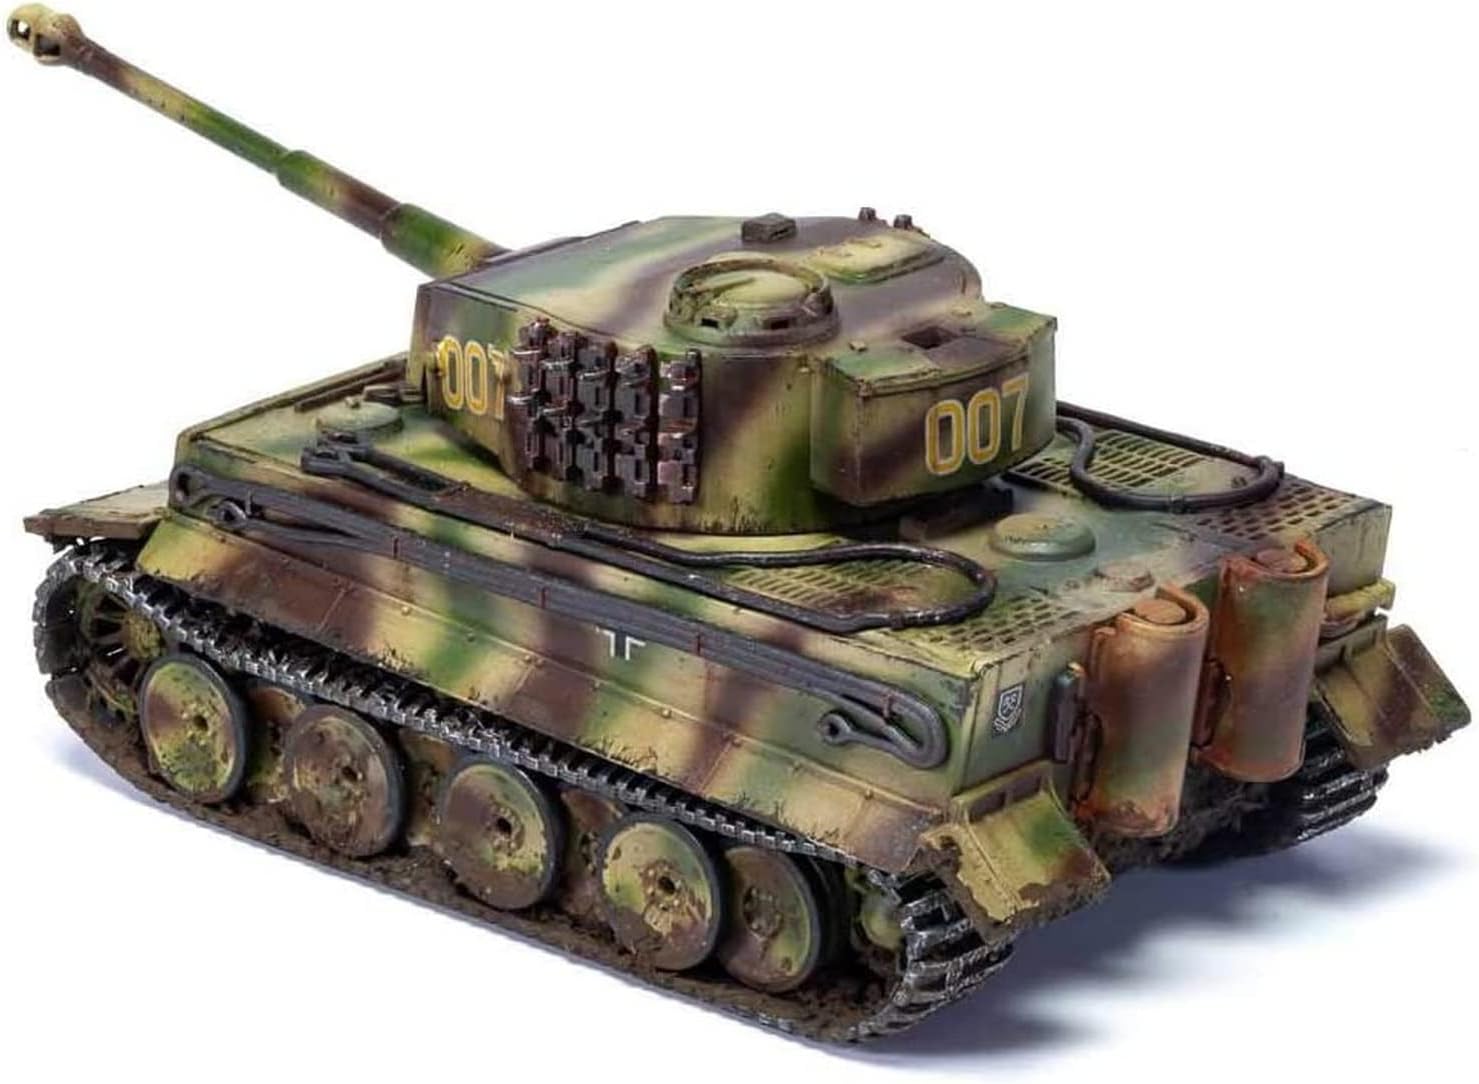 Tiger 1 (1:72) - Loaded Dice Barry Vale of Glamorgan CF64 3HD